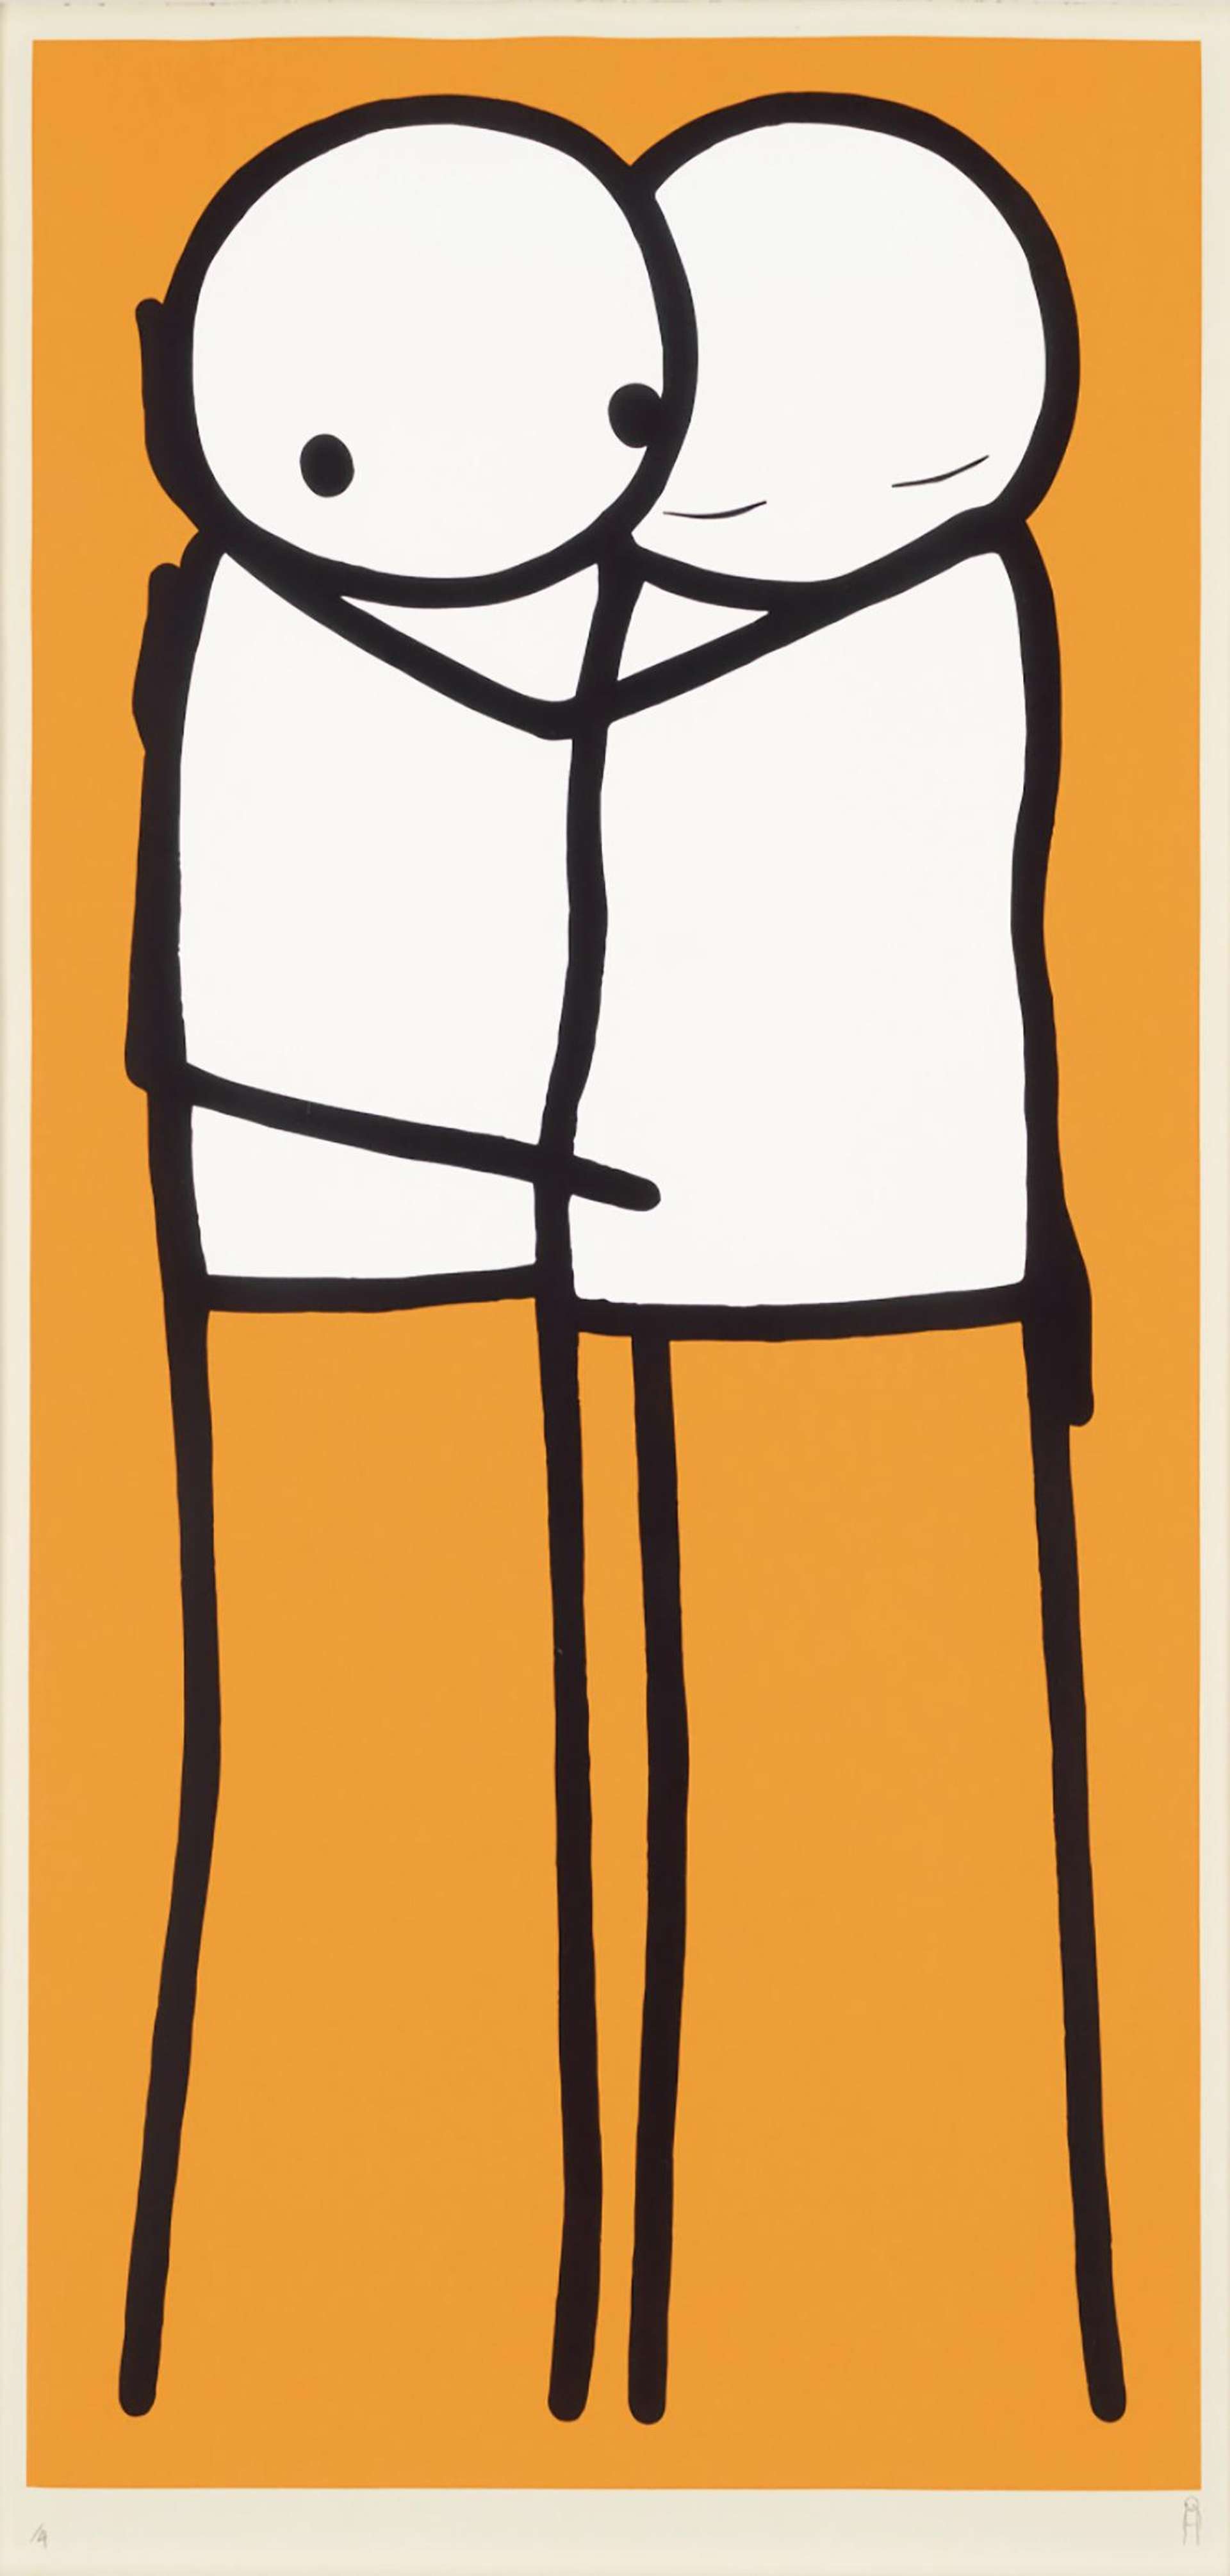 STIK’s Lovers (orange). A screenprint of two black outlined stick figures with white bodies standing side by side holding each other. 